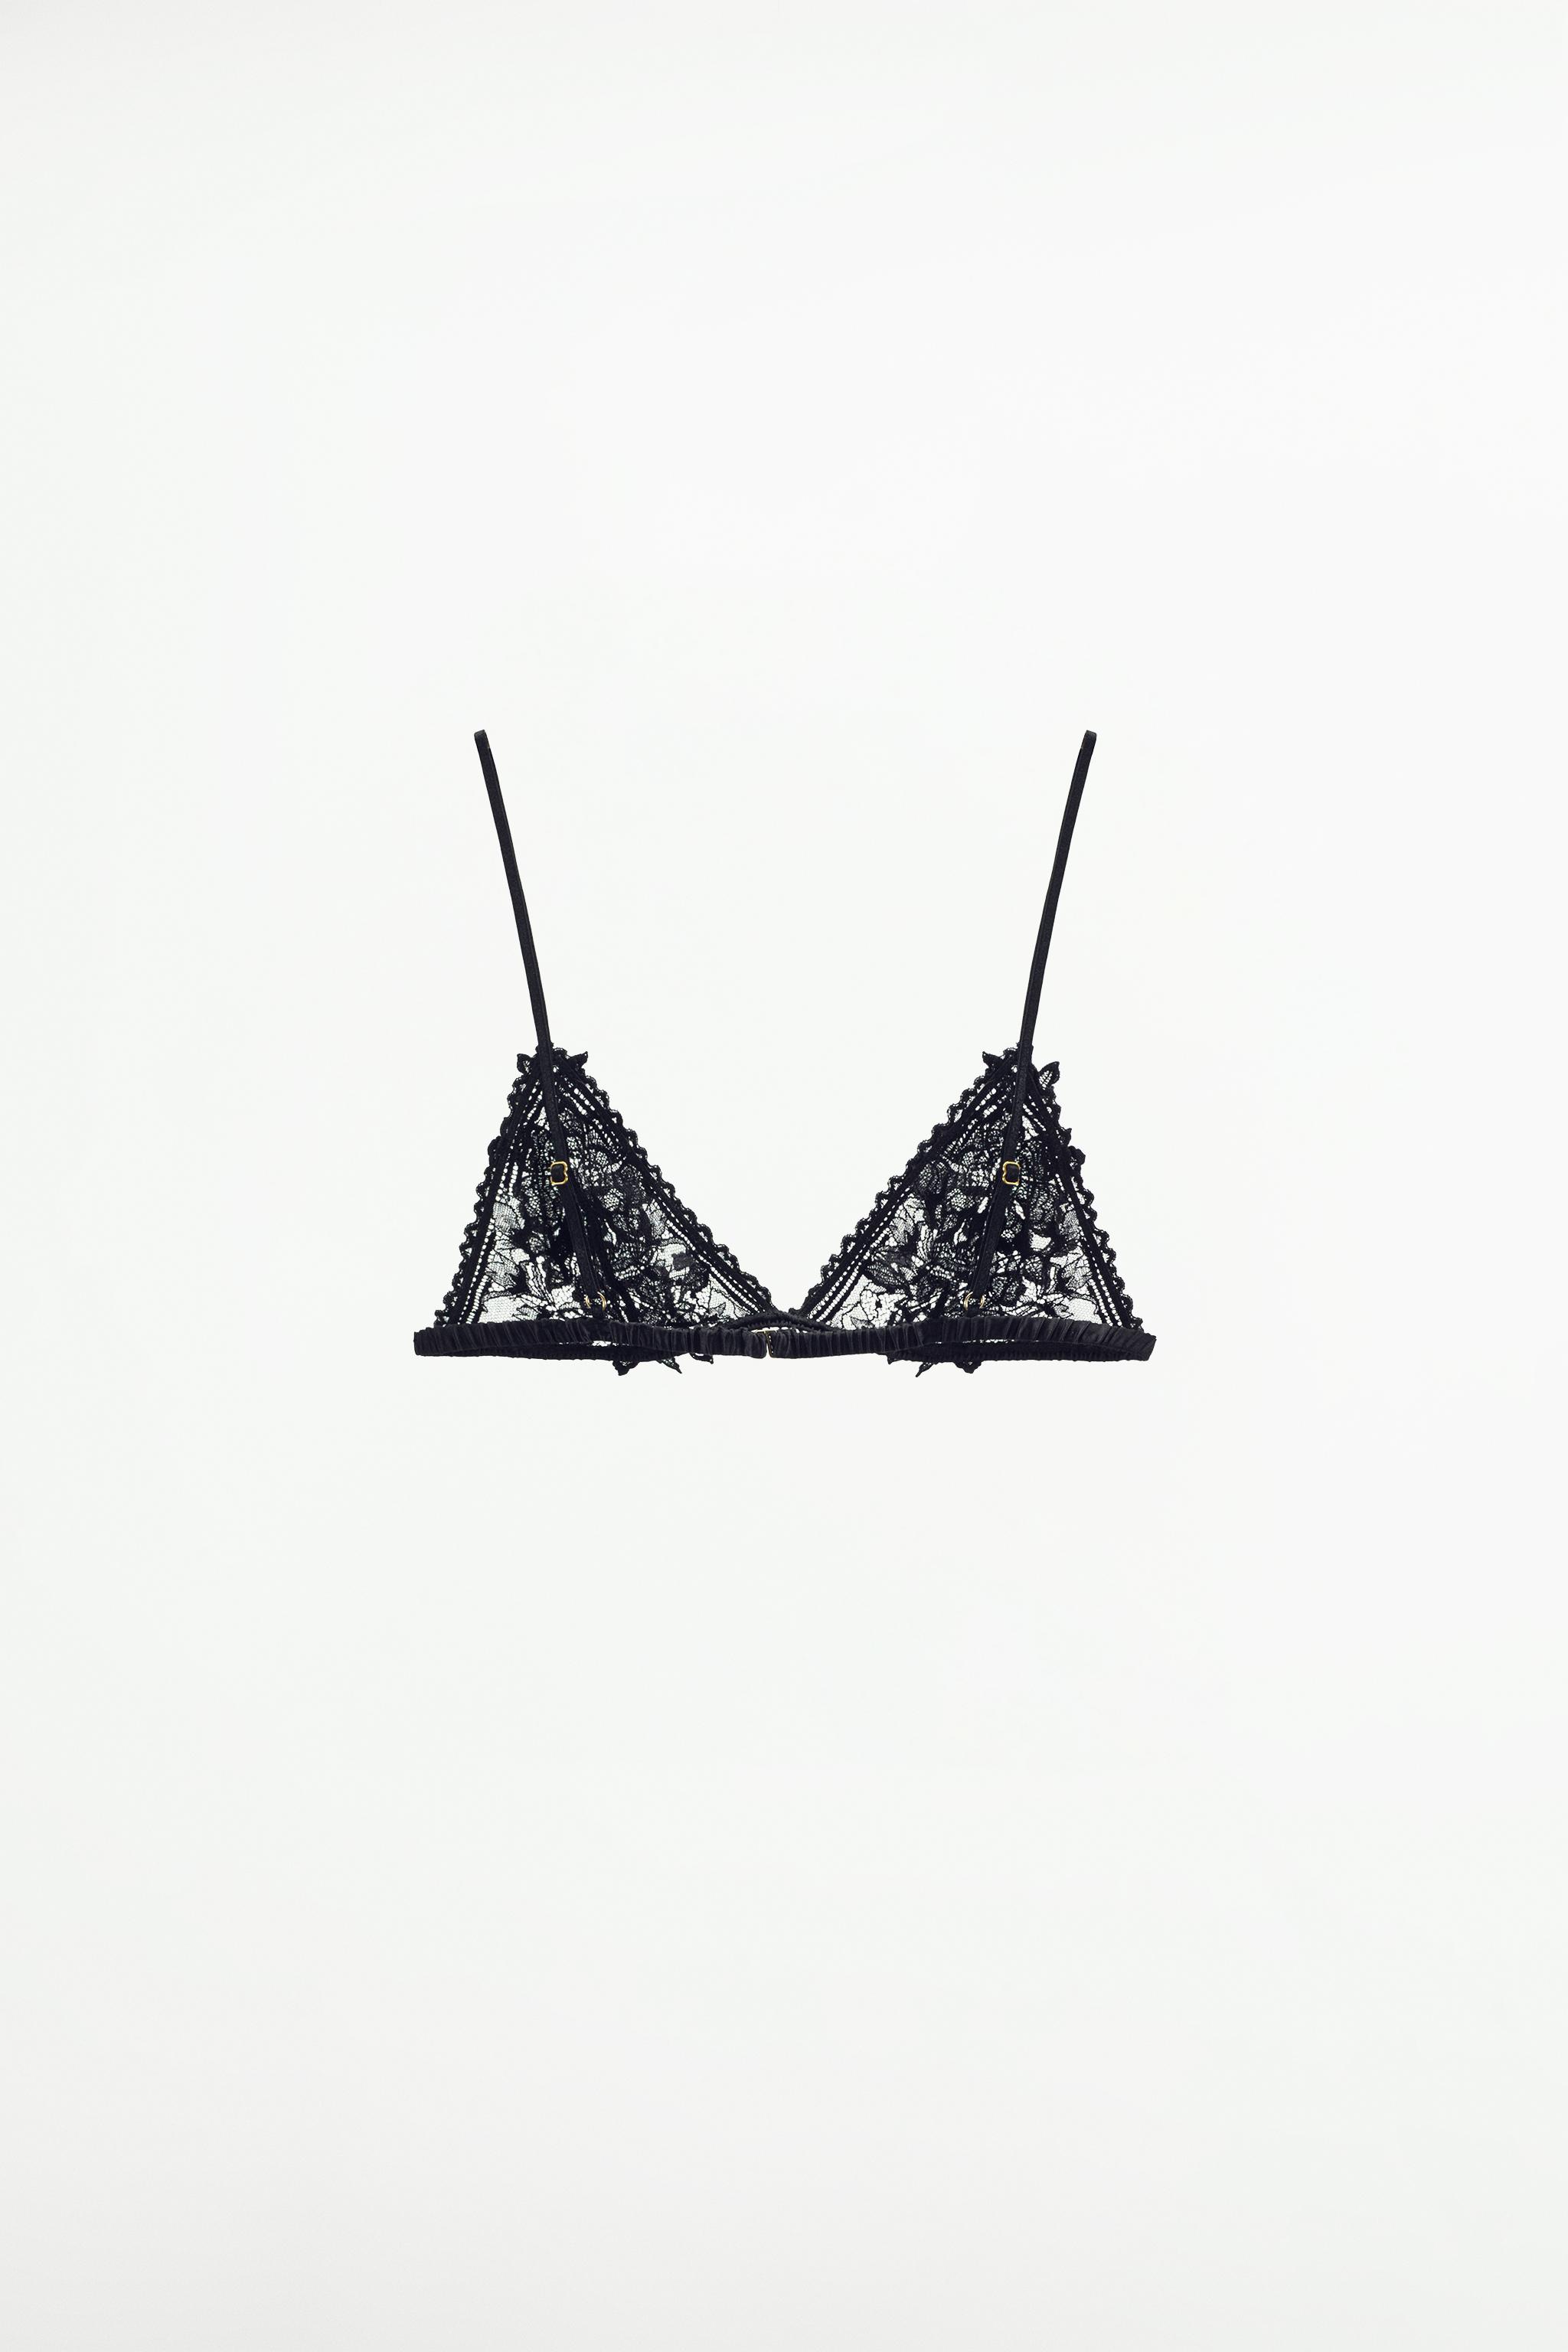 Numero Uno Ghana - The ZARA bralette has proved super popular for its  comfort, support, and pretty lace details. Comes with a V-neck detail with  adjustable thin straps. Available and on sale. #